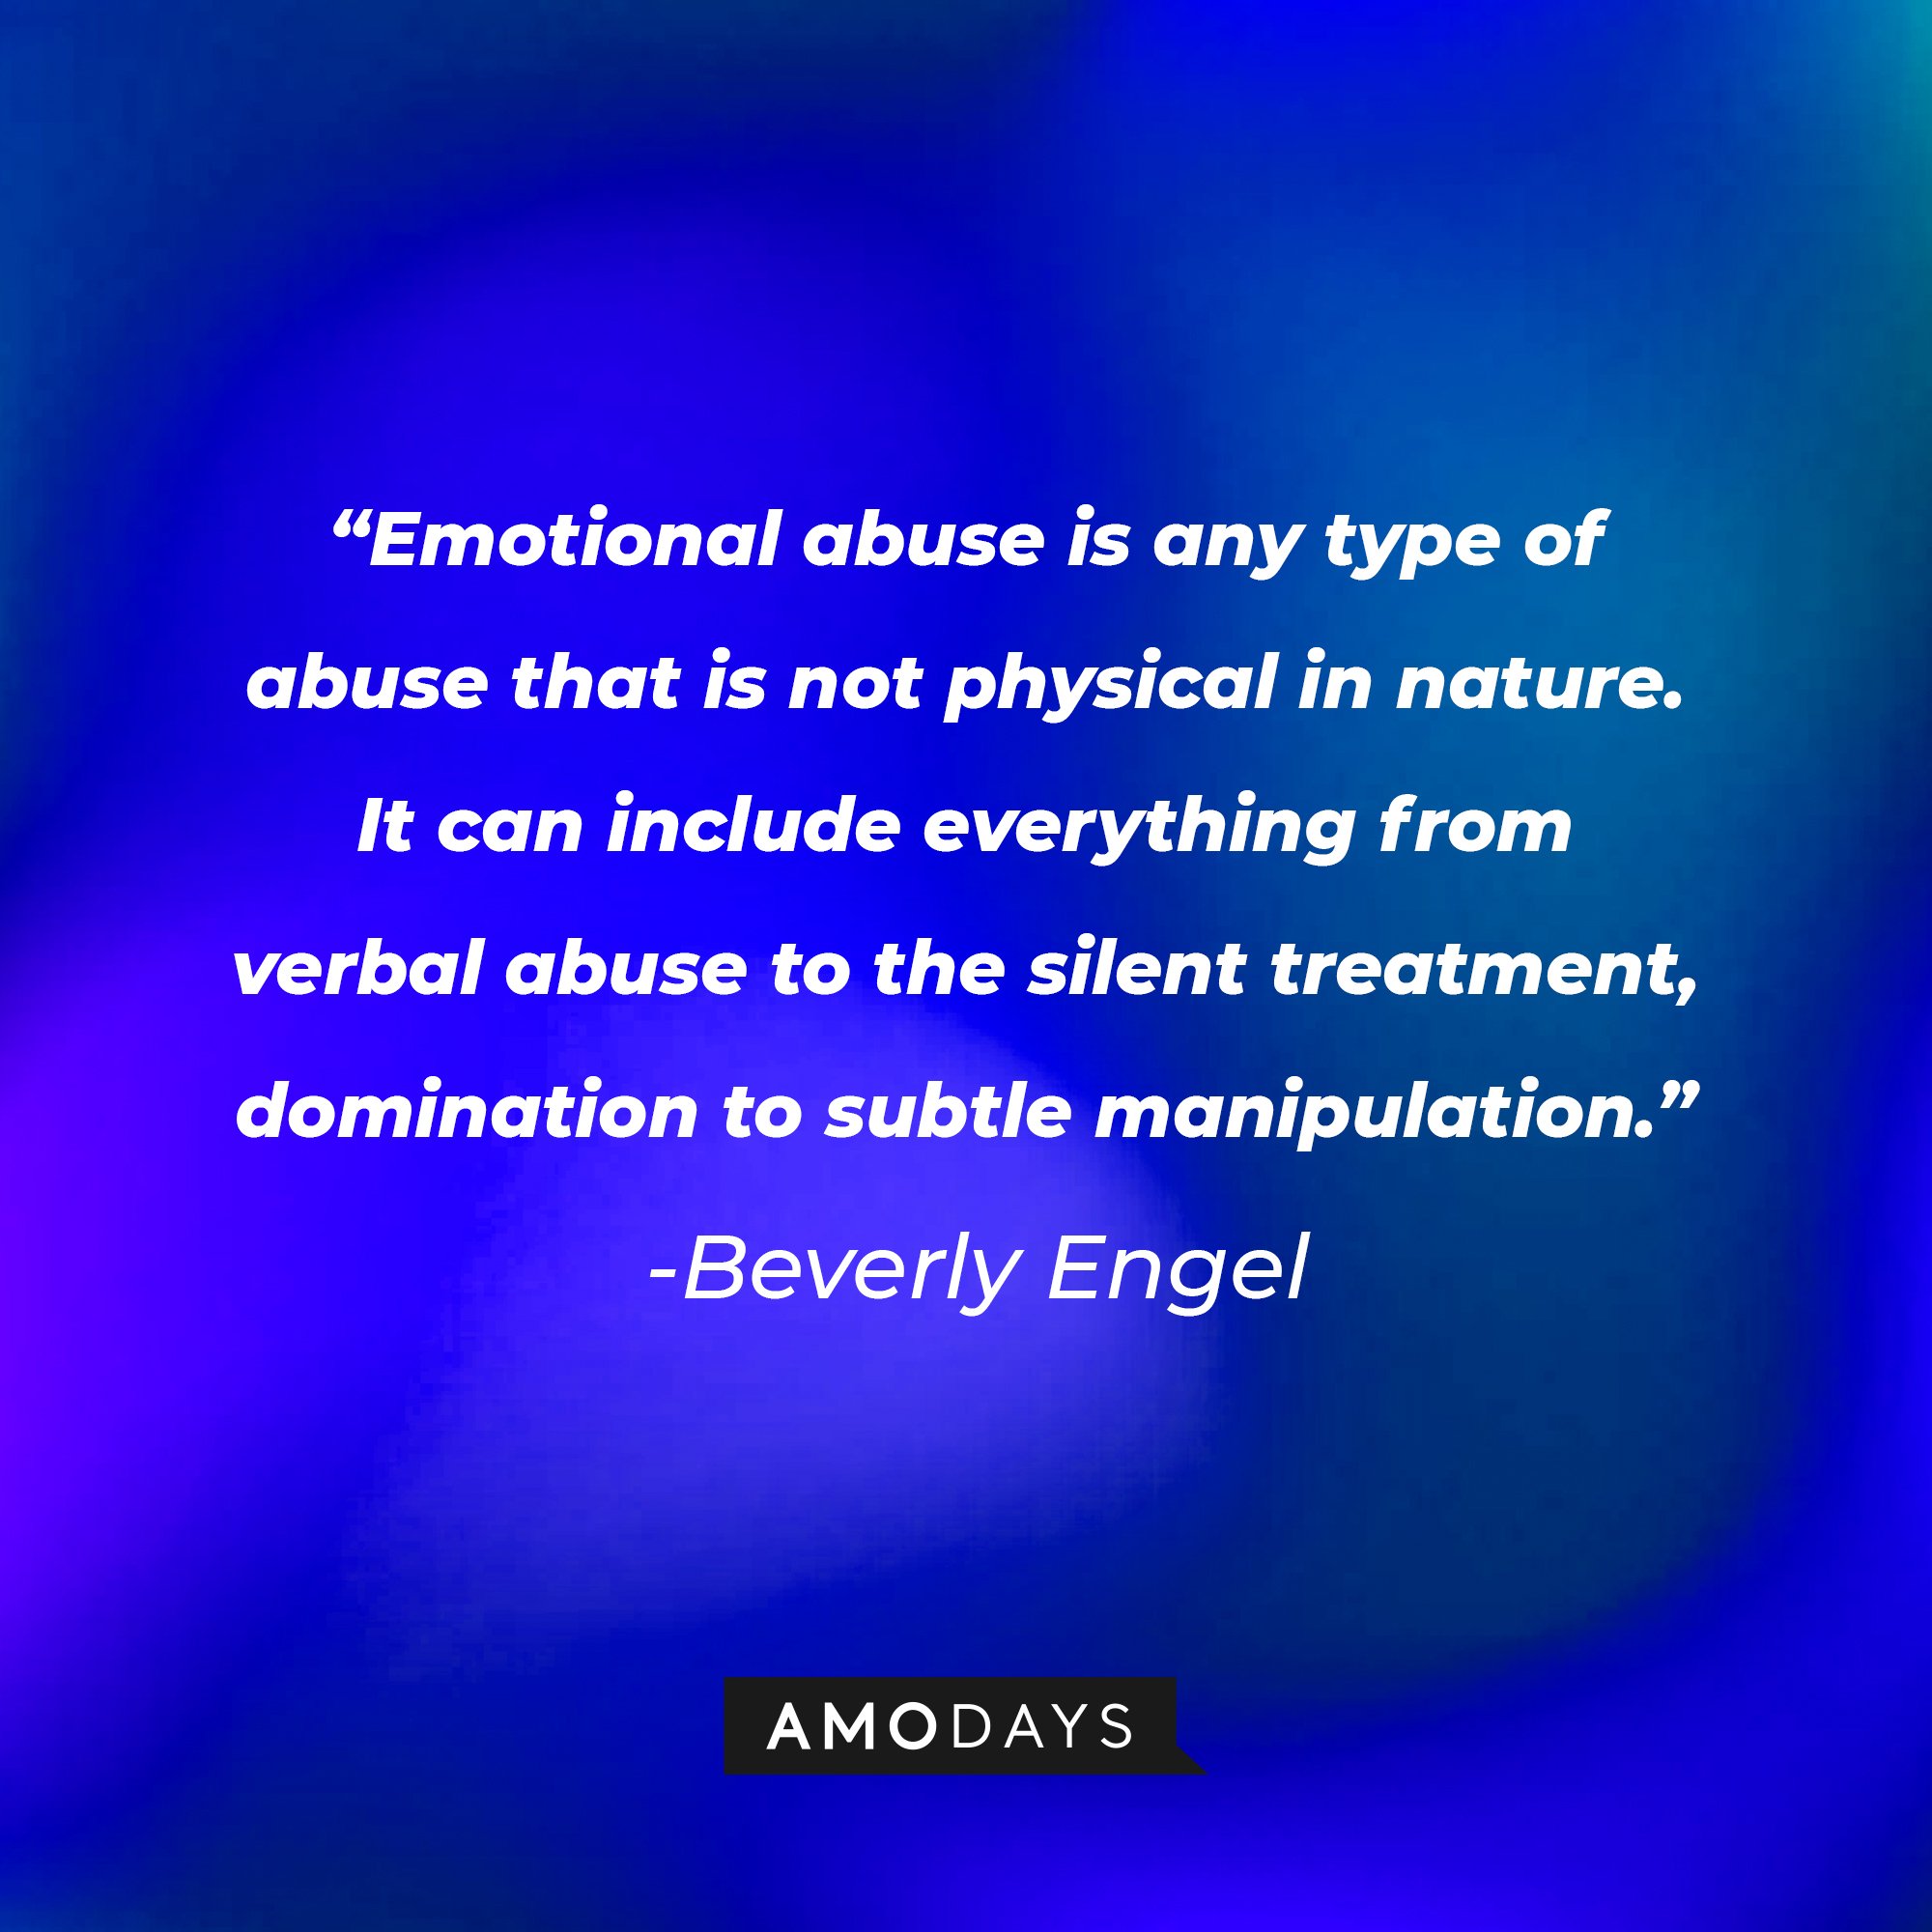 Beverly Engel's quote:\\\\u00a0"Emotional abuse is any type of abuse that is not physical in nature. It can include everything from verbal abuse to the silent treatment, domination to subtle manipulation."\\\\u00a0| Image: AmoDays